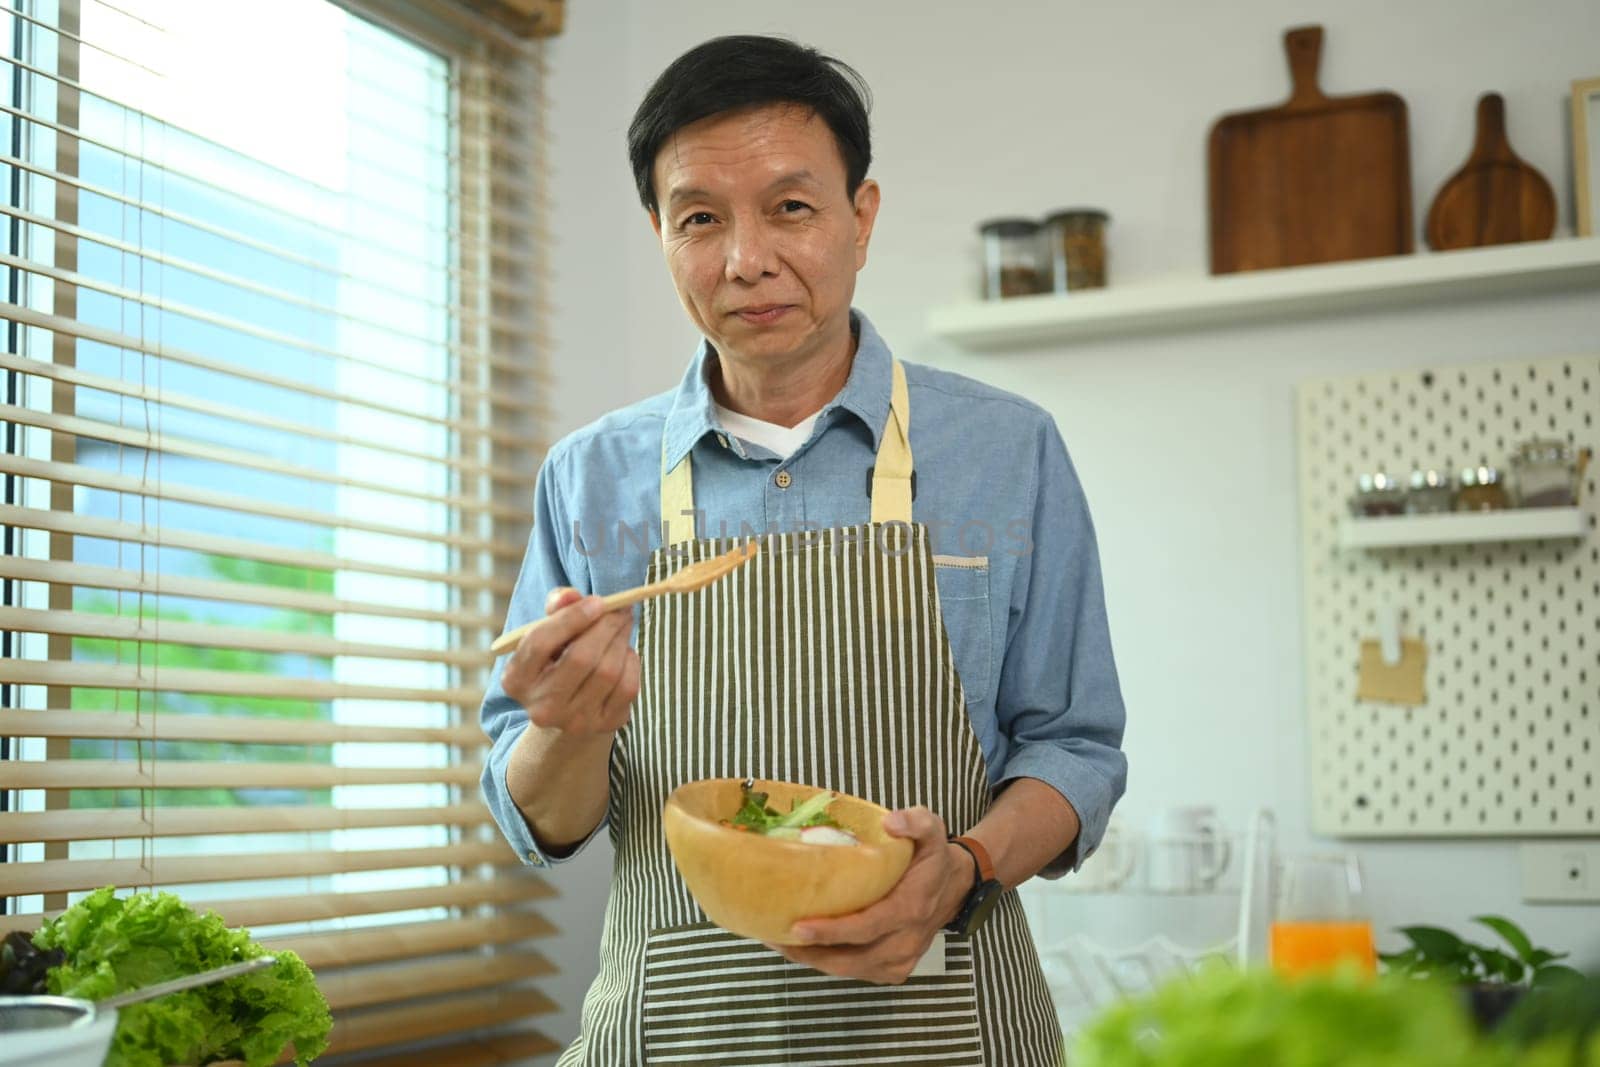 Happy Asian senior man eating healthy vegetable salad in kitchen. Healthy lifestyle, dieting and nutrition concept. by prathanchorruangsak